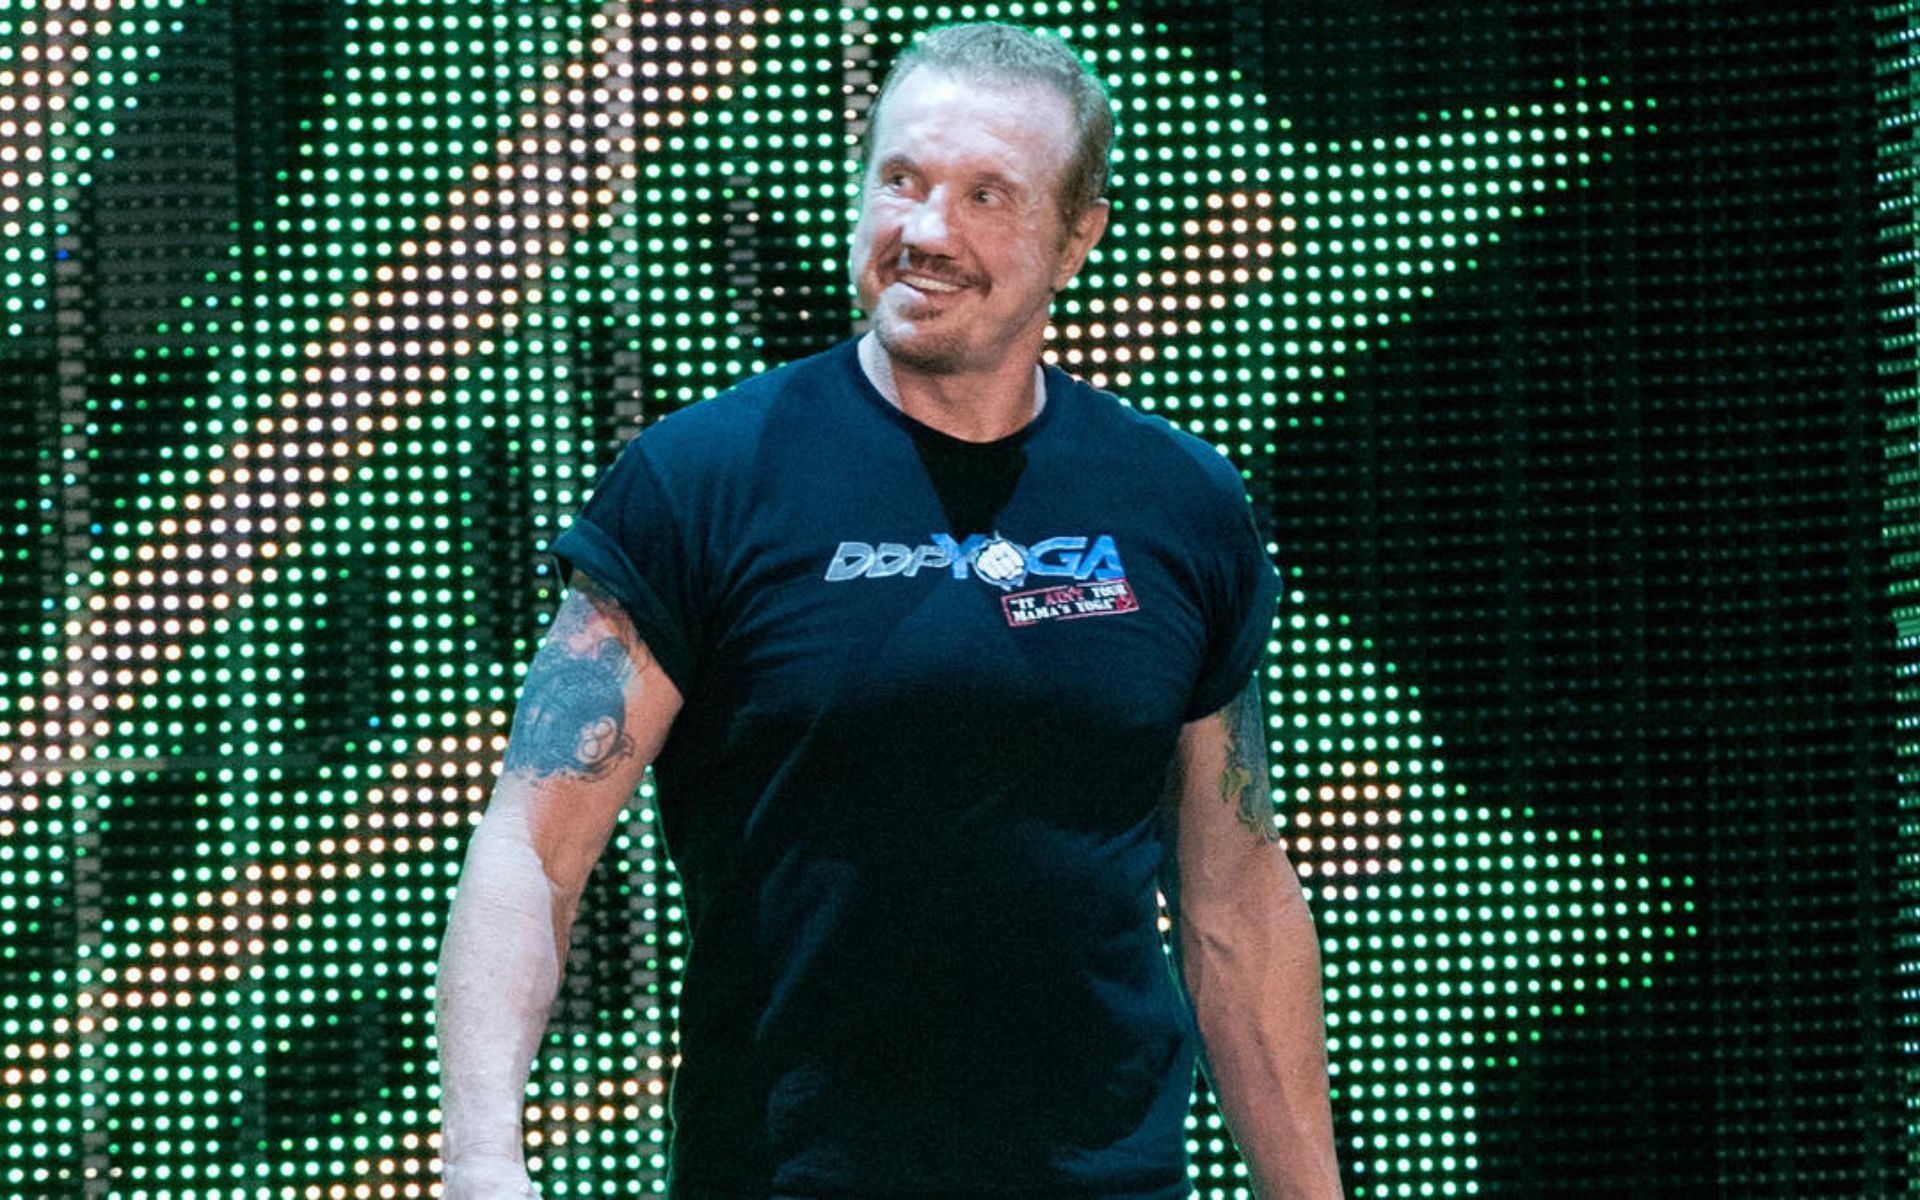 DDP is a former WCW World Champion!